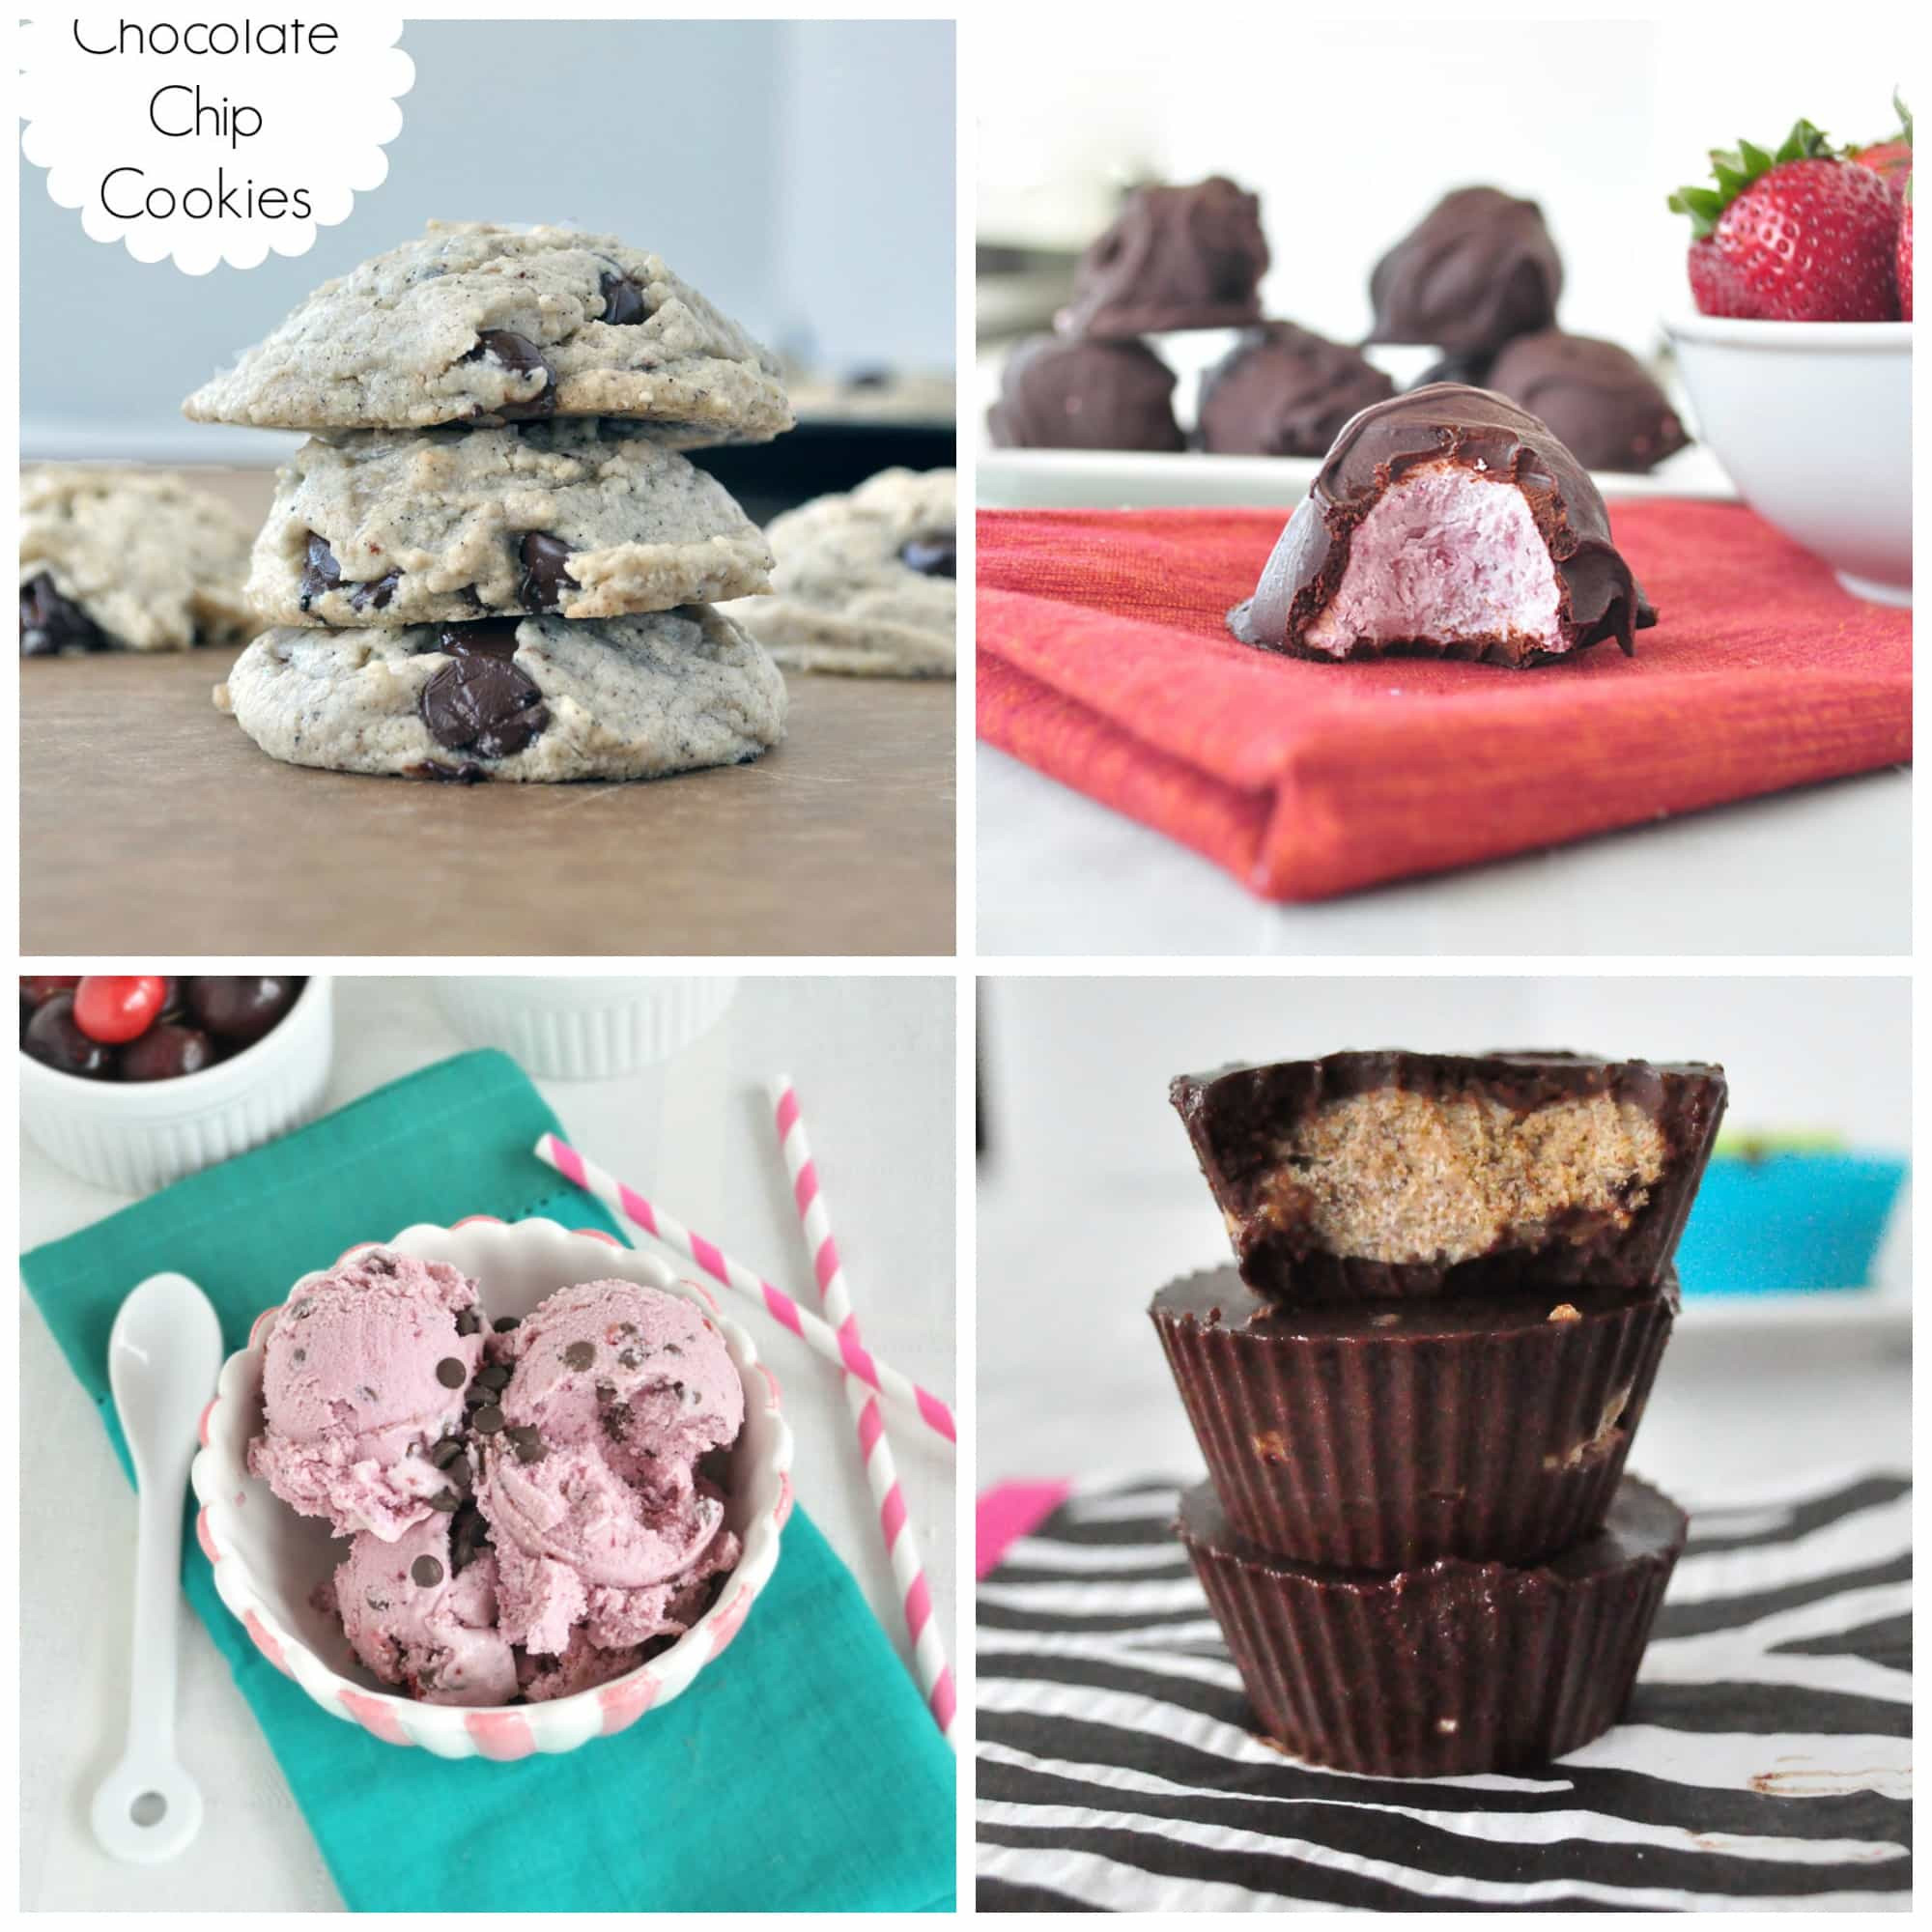 Healthy Desserts Recipes
 20 Healthy Dessert Recipes with 5 Ingre nts or Less My